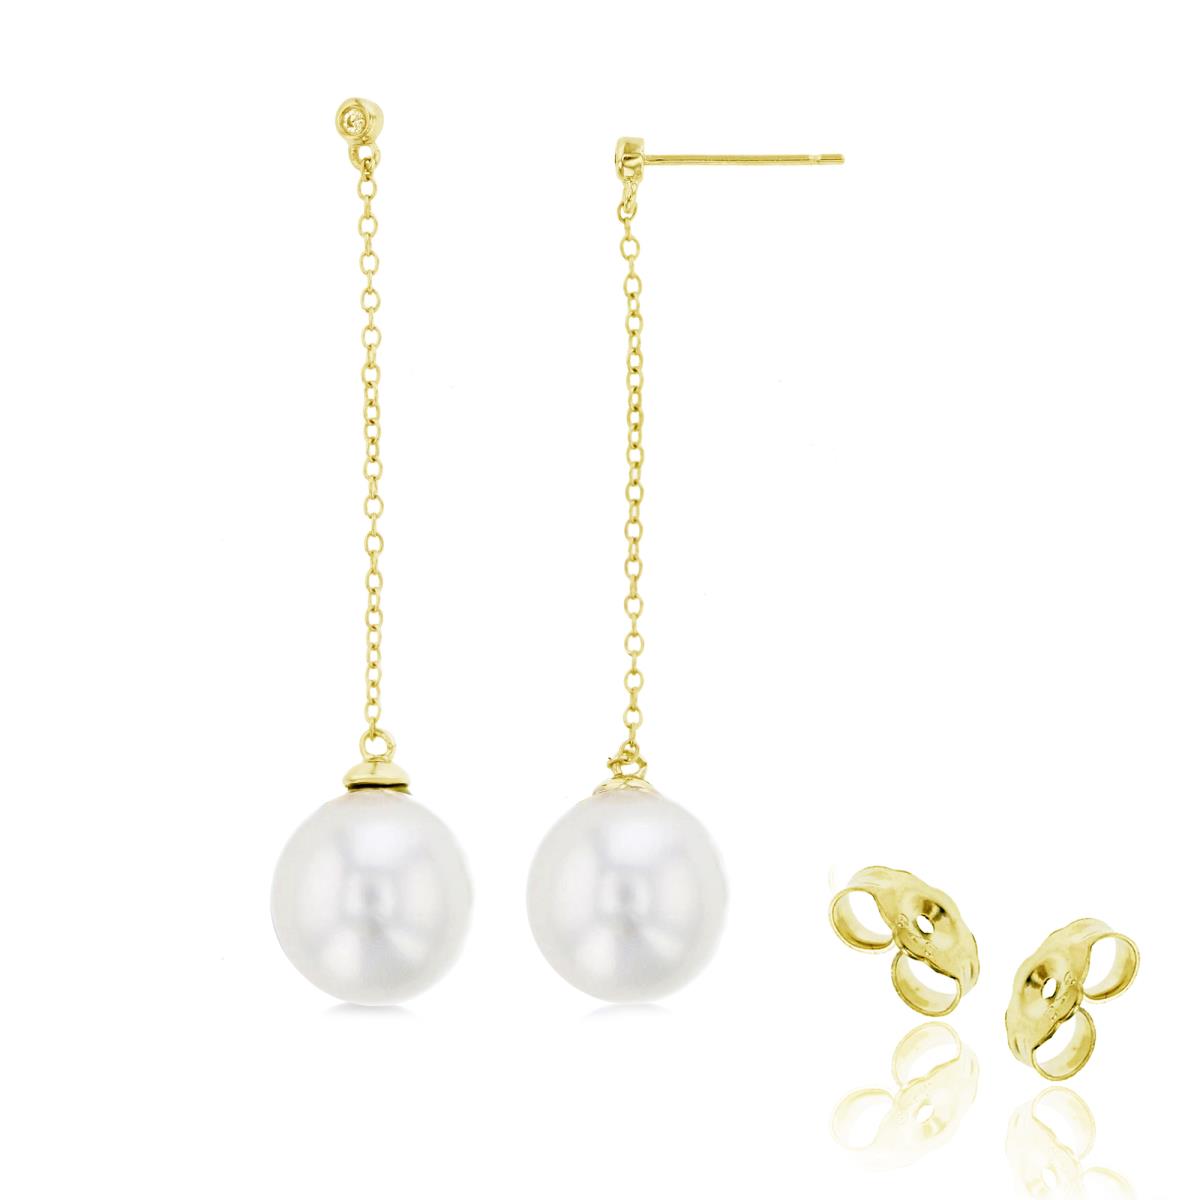 14K Yellow Gold 0.03 CTTW Rnd Diam & 8mm Rnd Pearl Drop on 1.5"Chain Earring